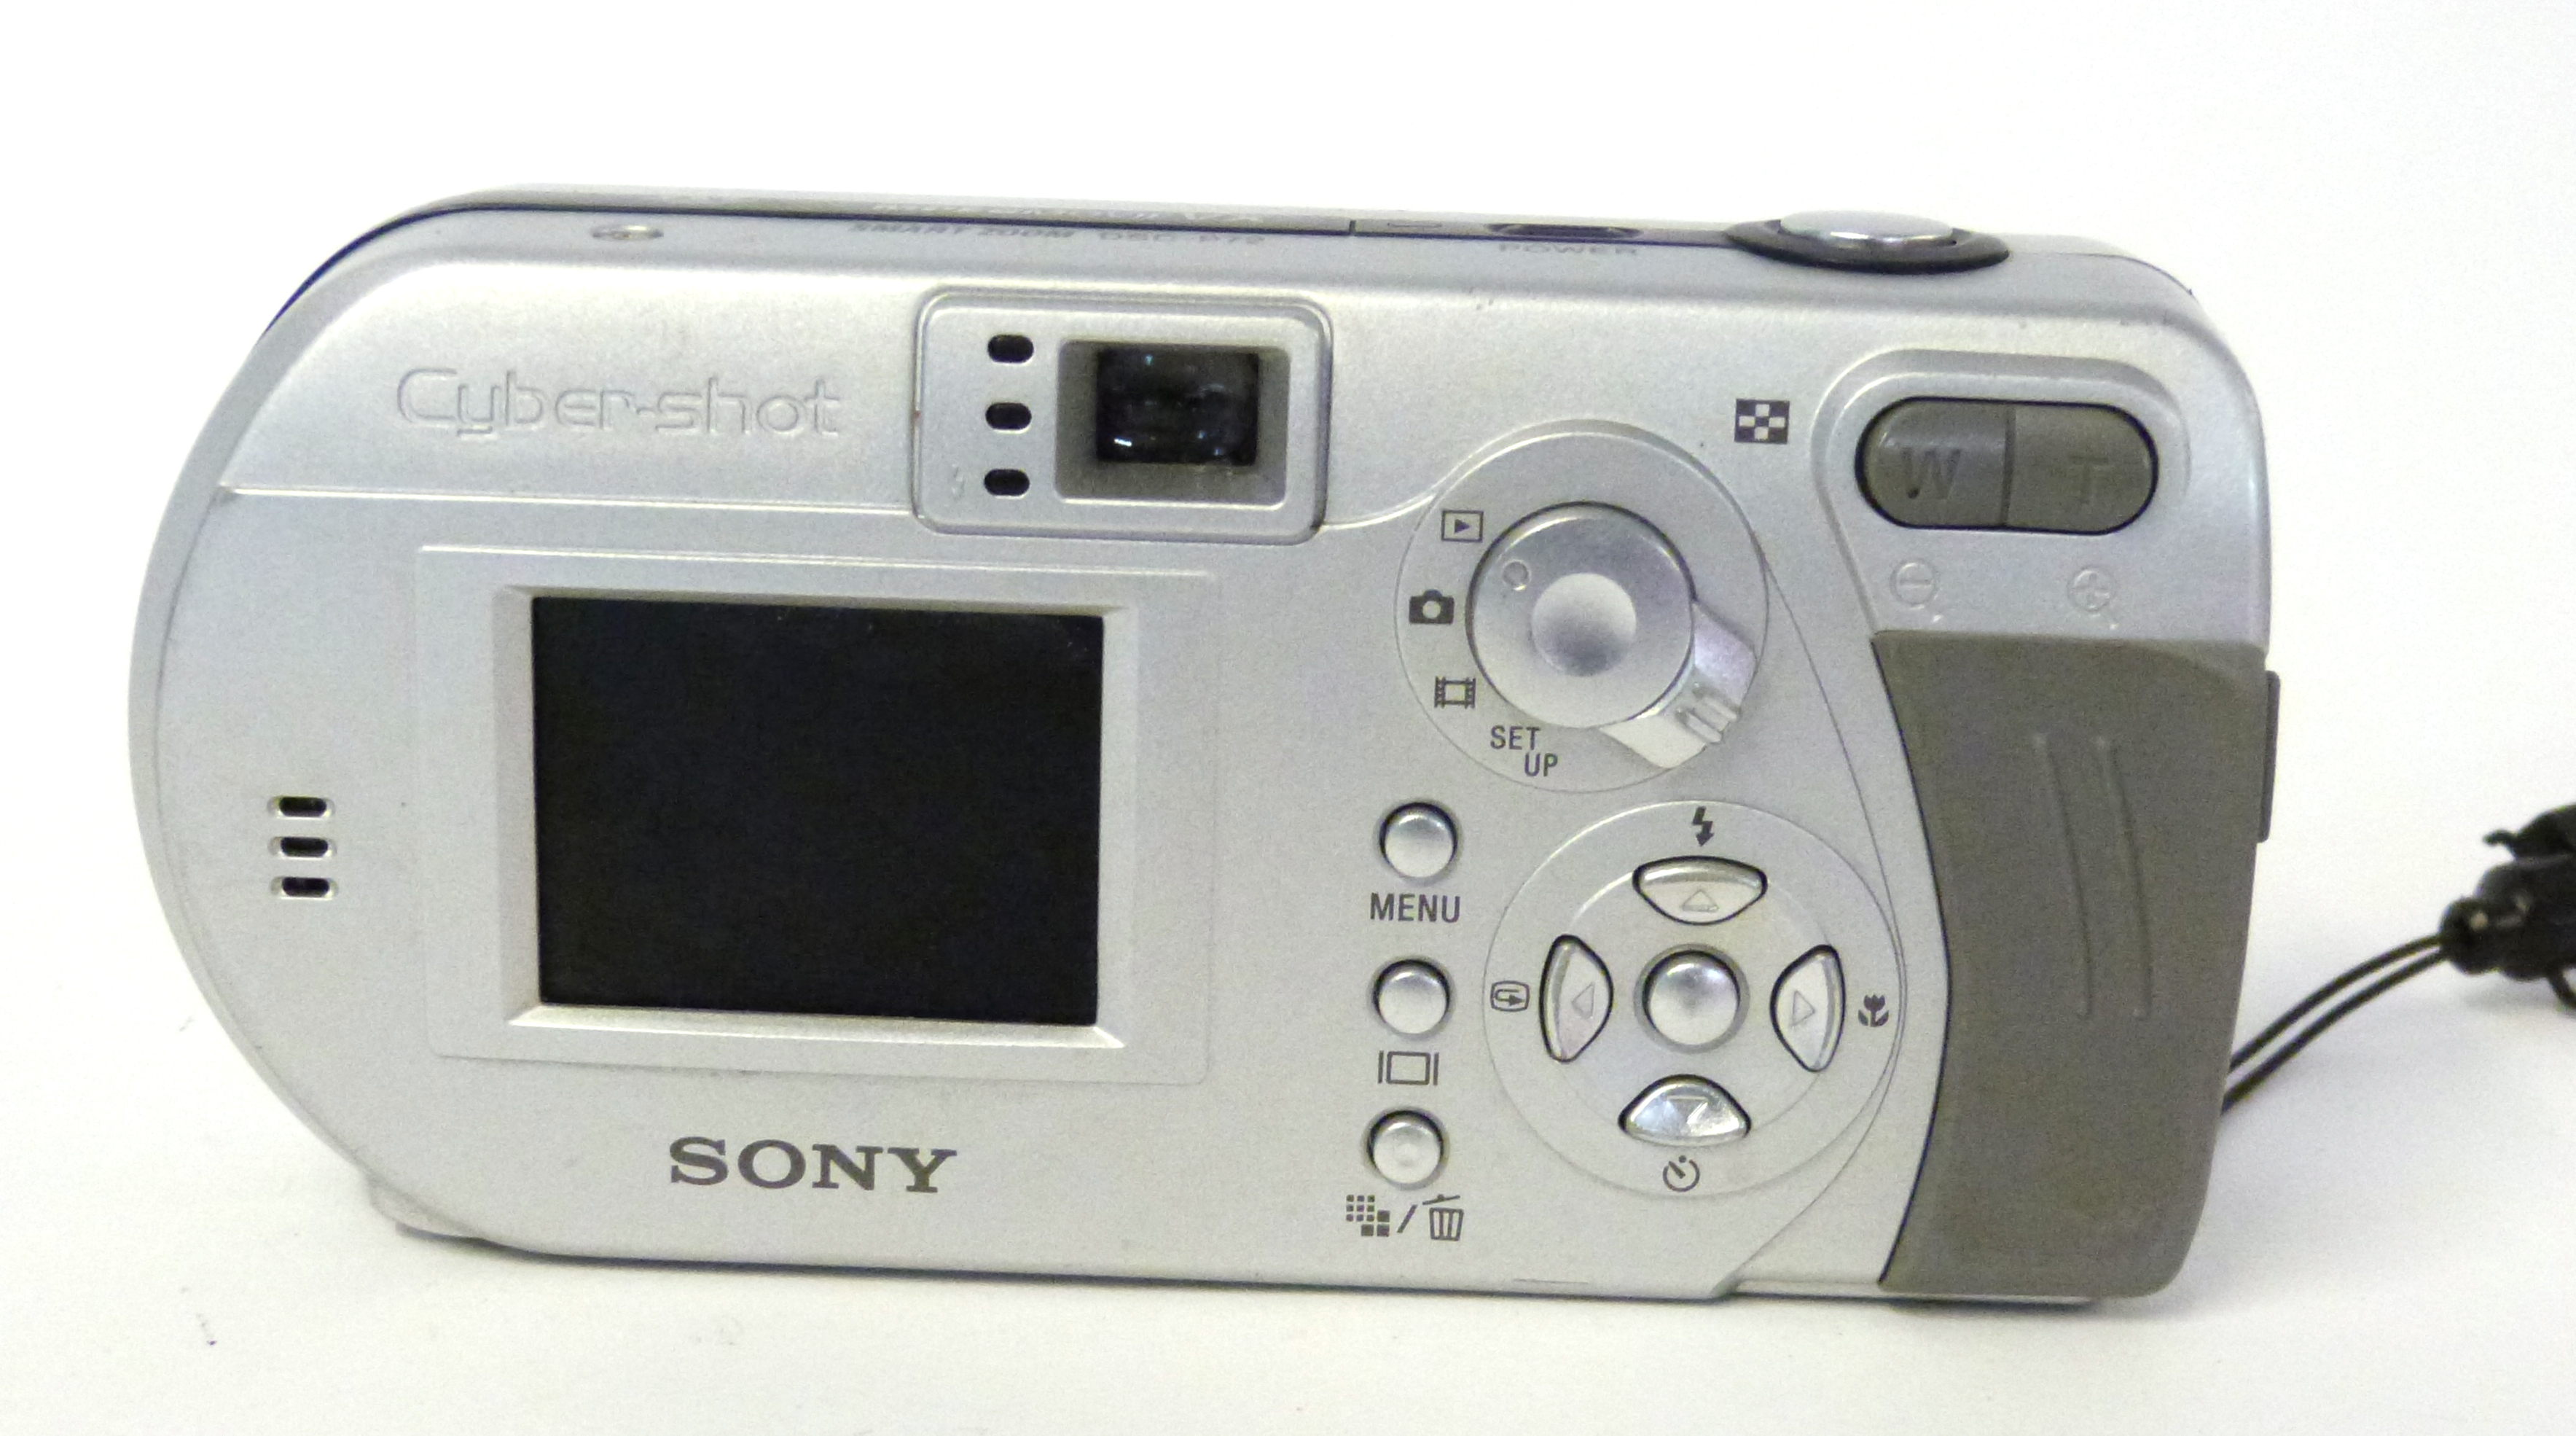 Sony Smart zoom DSC-P72 digital camera with case - Image 4 of 4